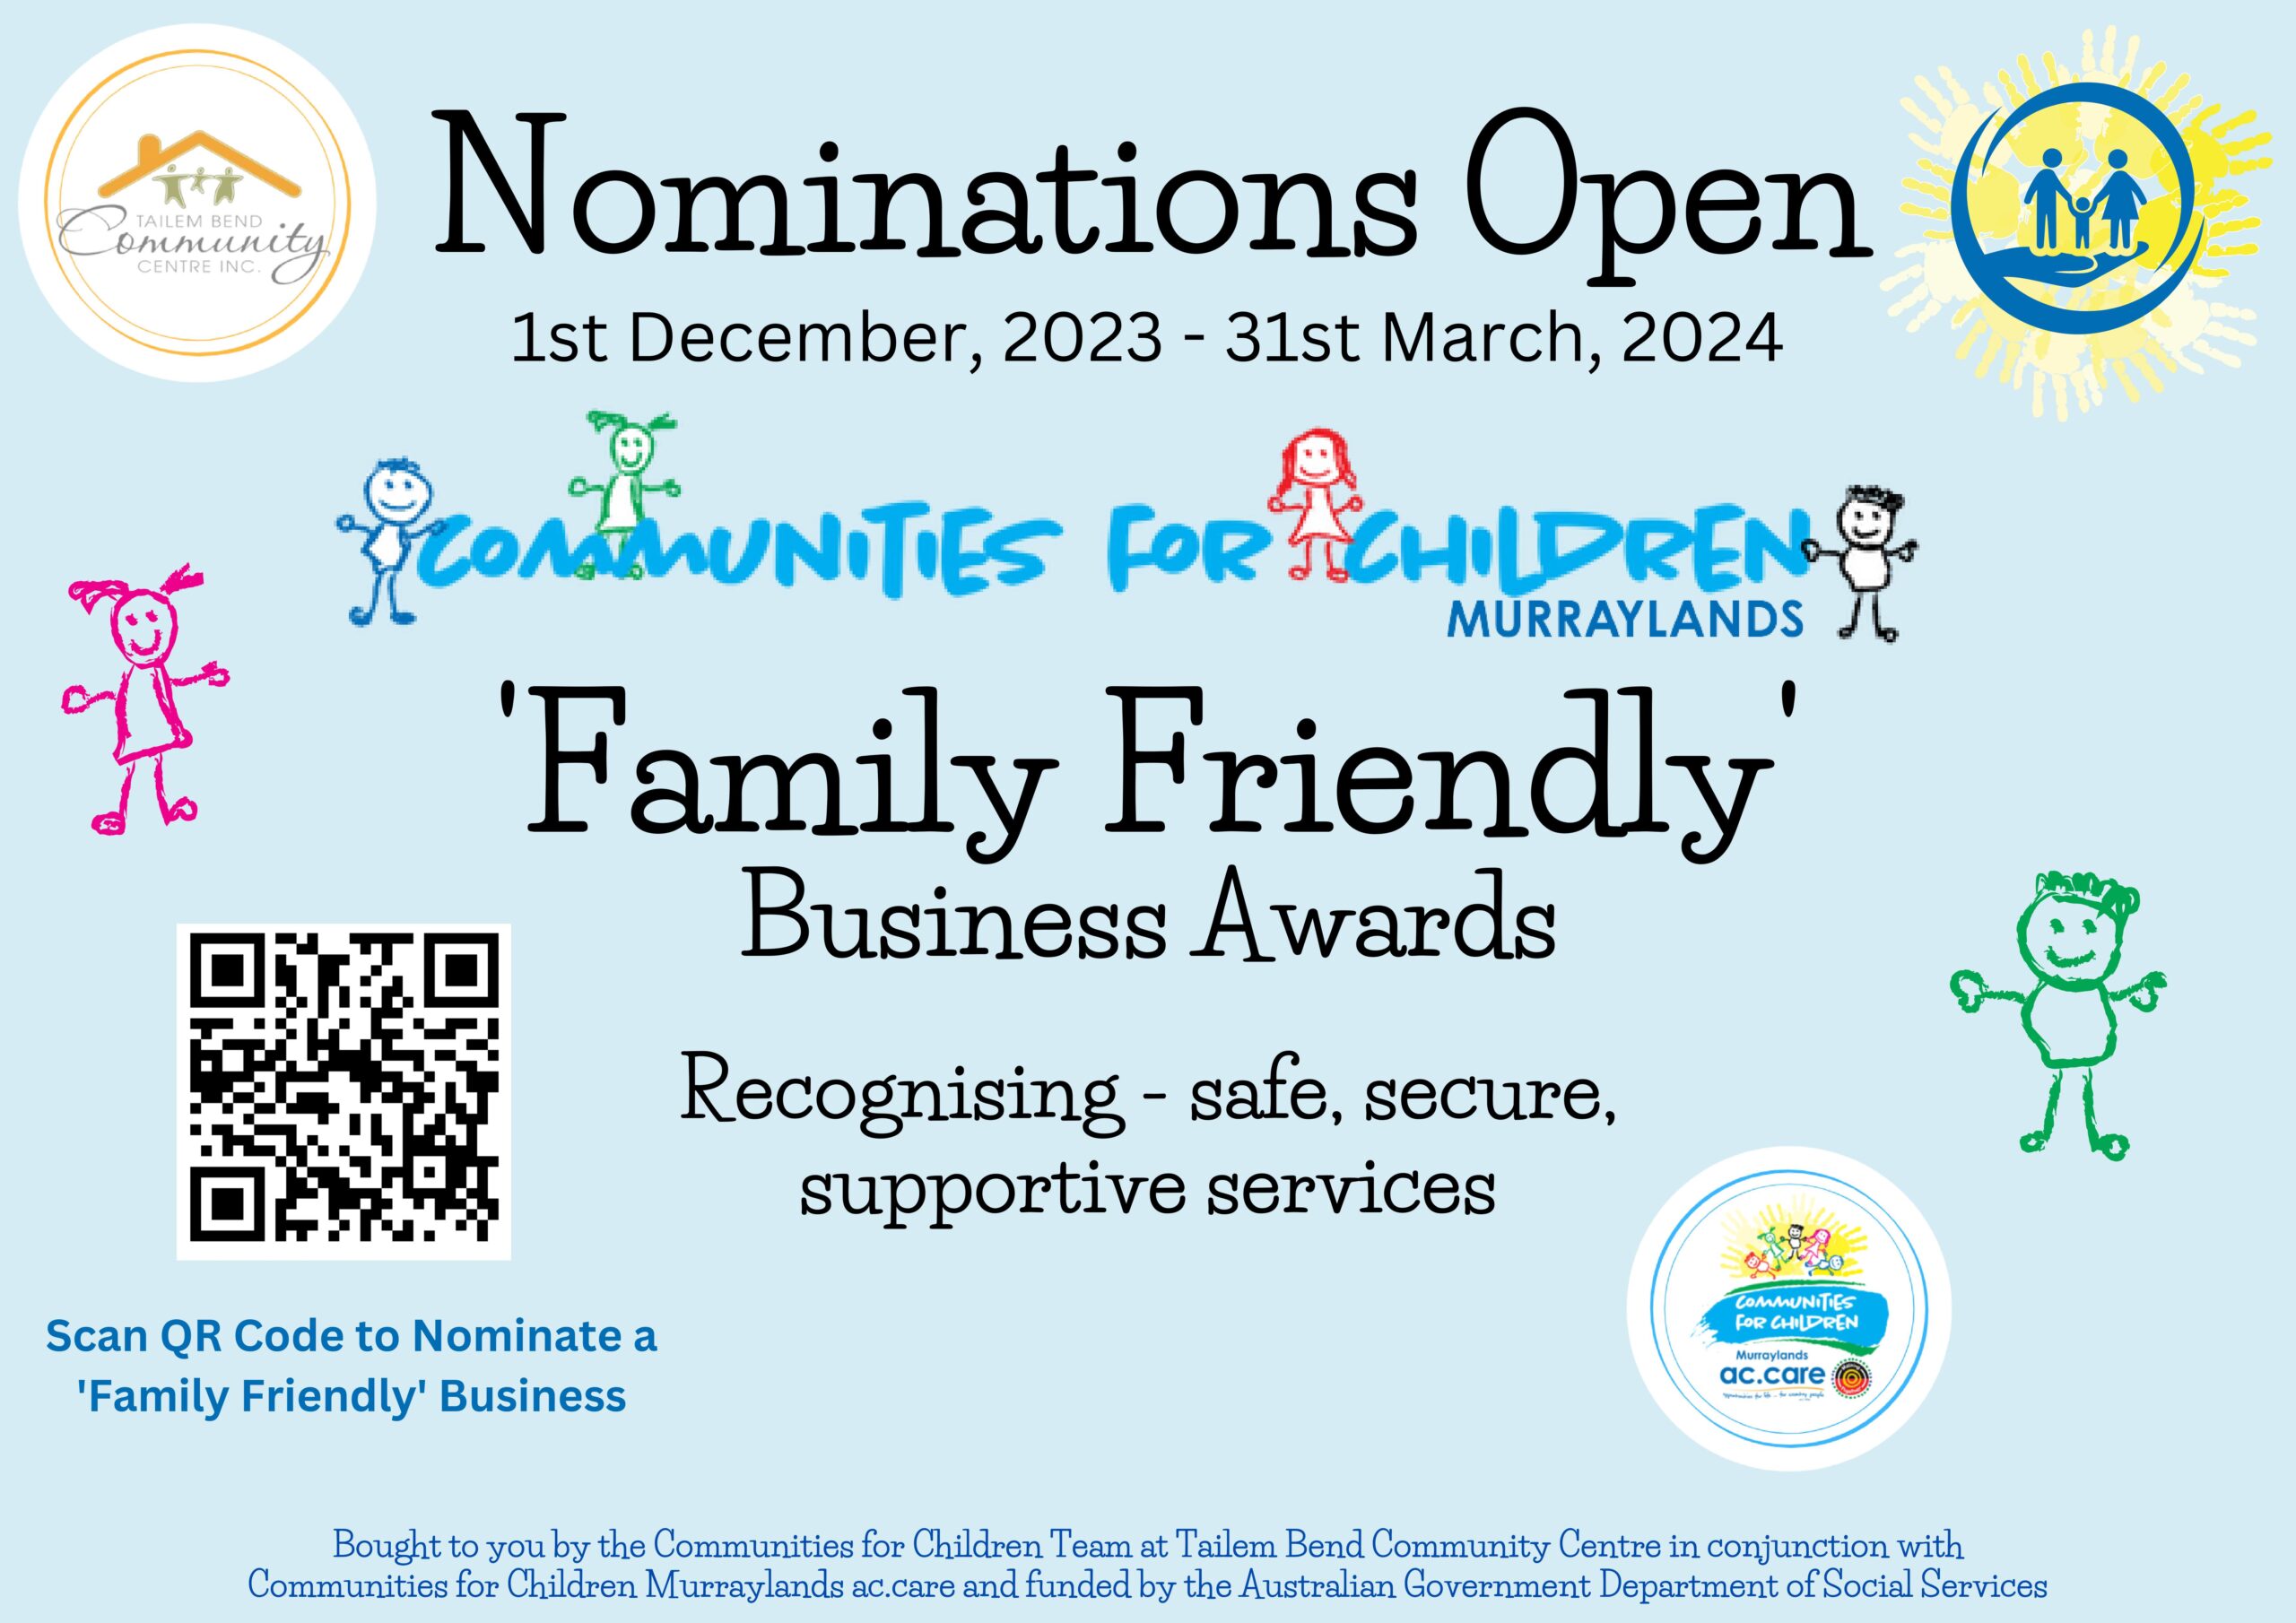 6. 'Family Friendly' Nominations Open